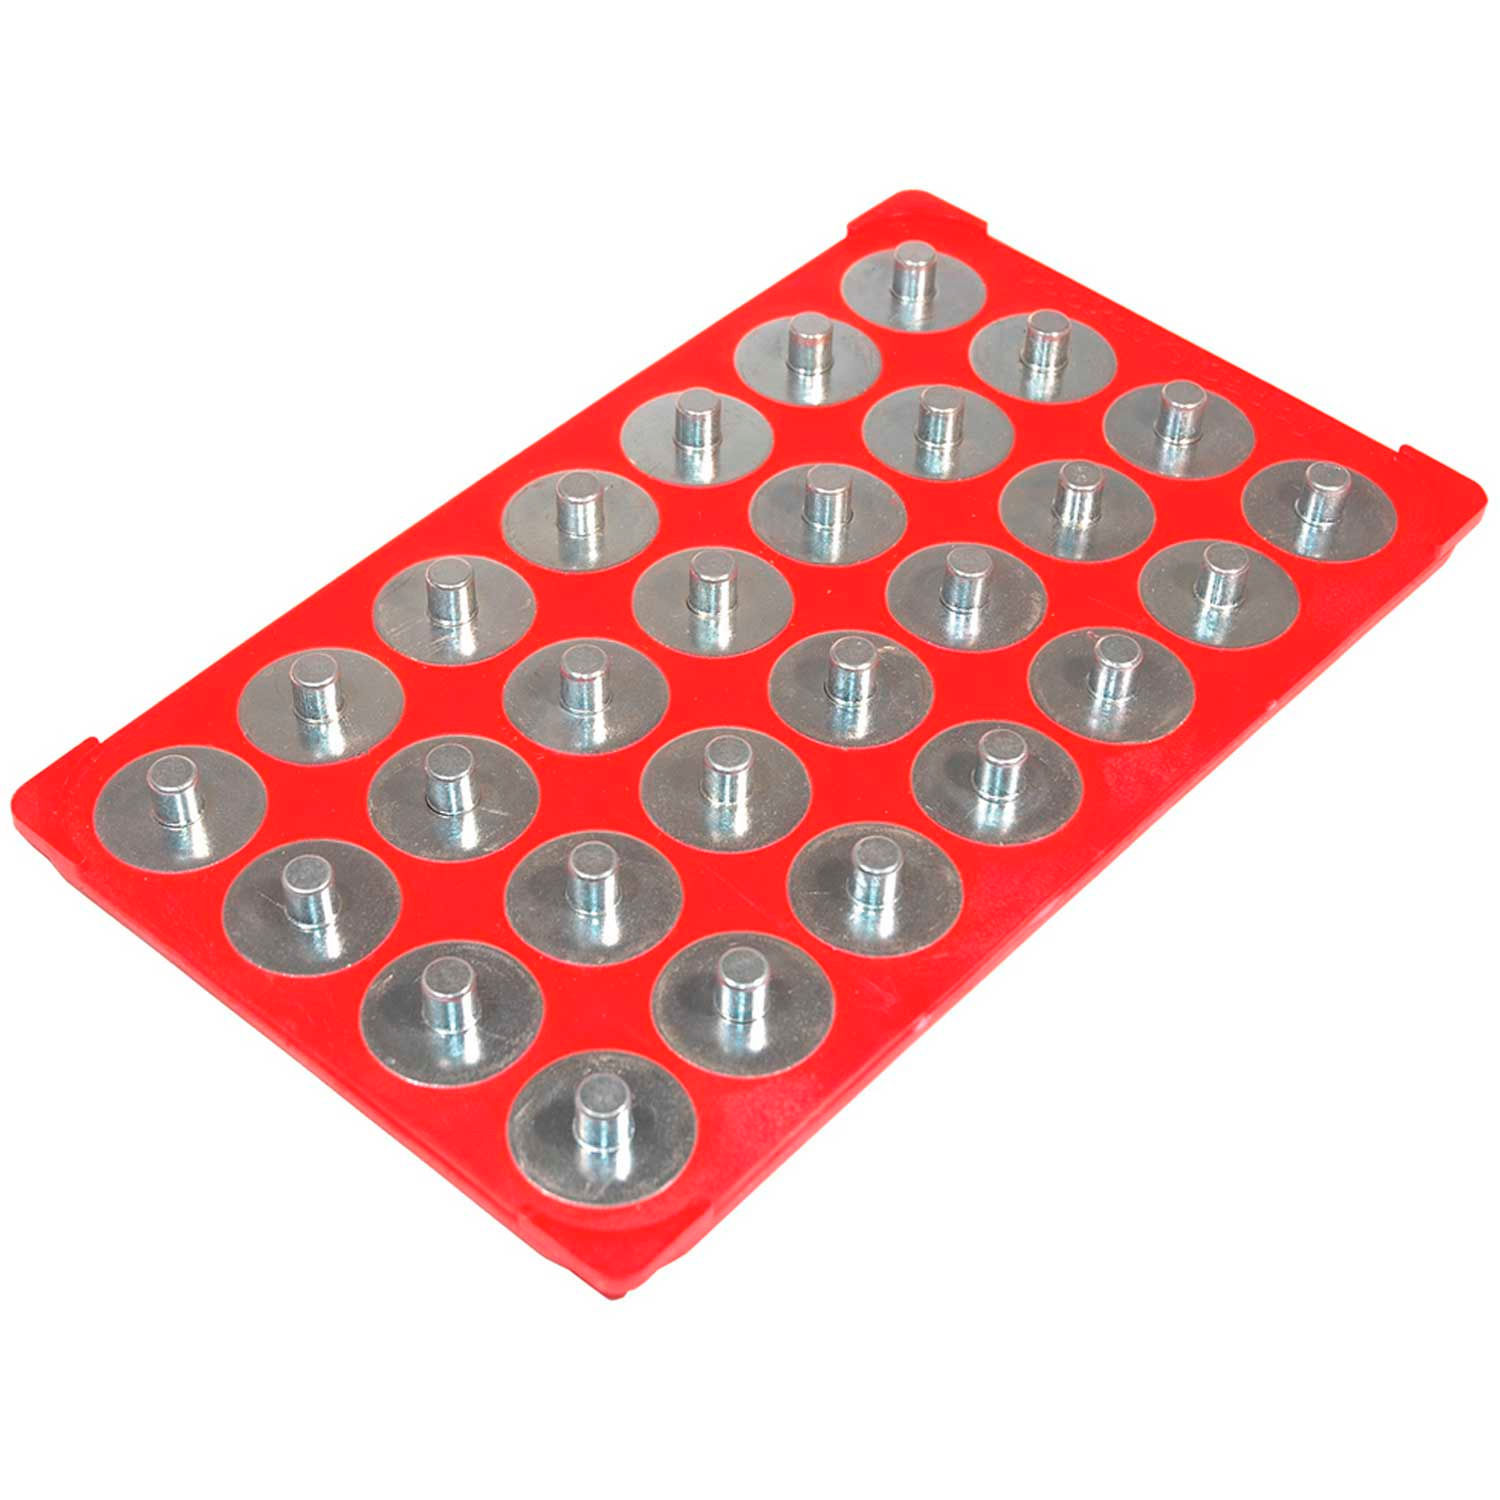 Triton Products® ORIGINAL SOCKET CADDY RED 3/8" - image 1 of 2